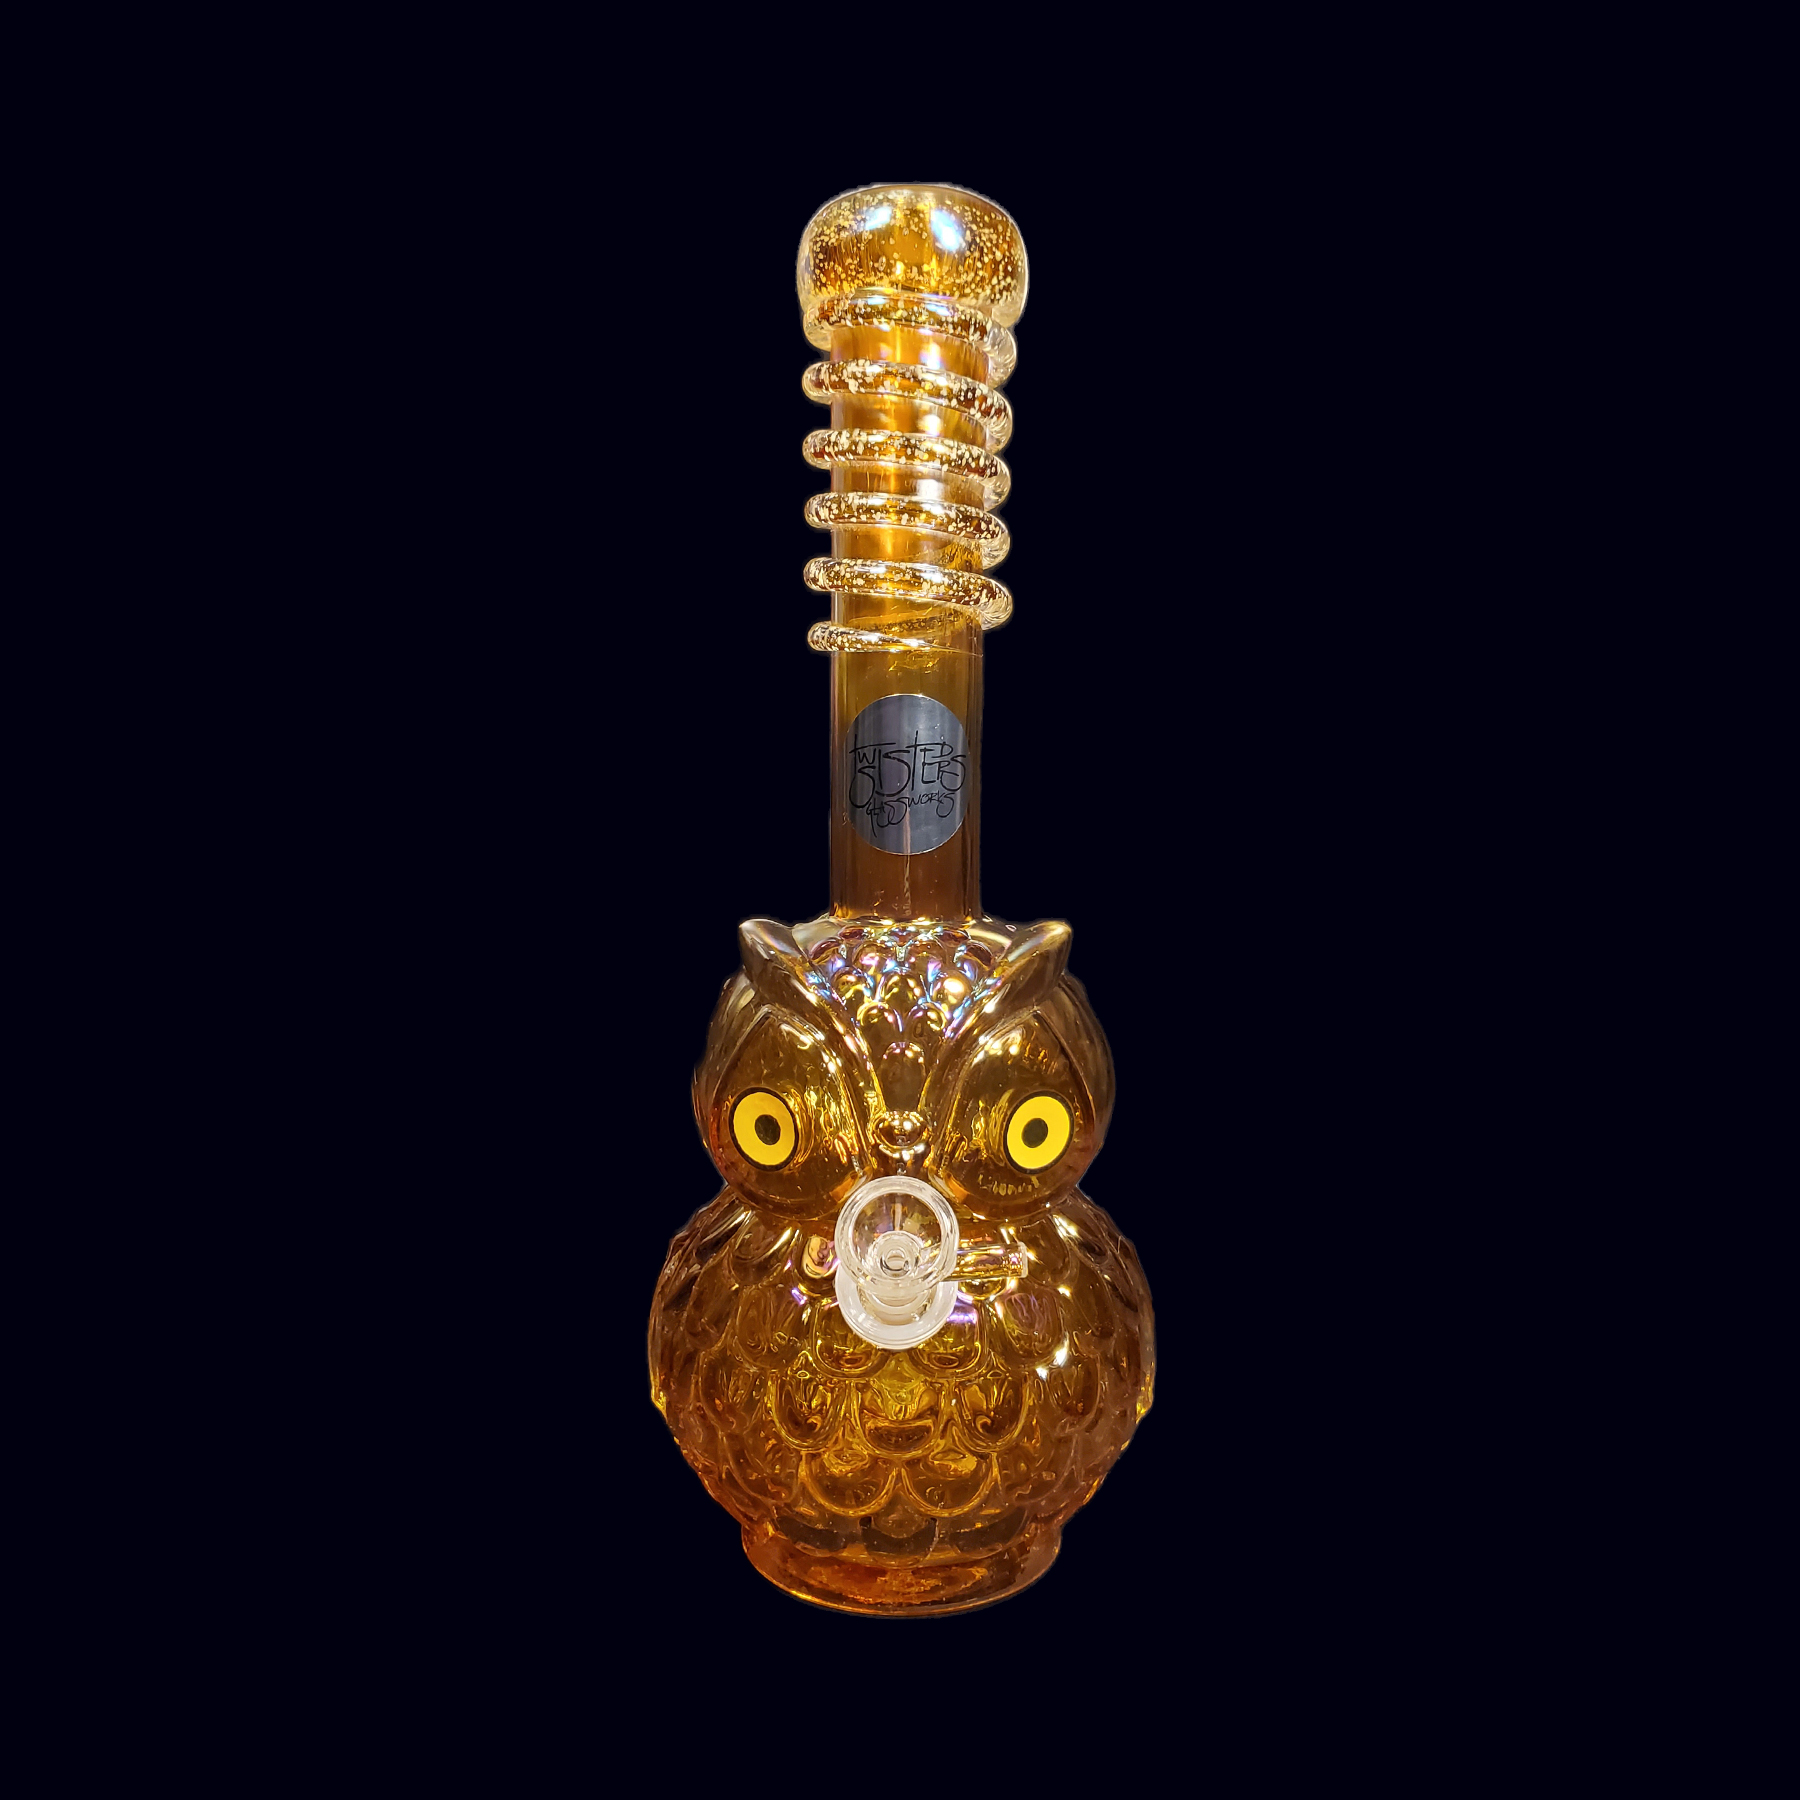 A glass owl bottle with yellow eyes.